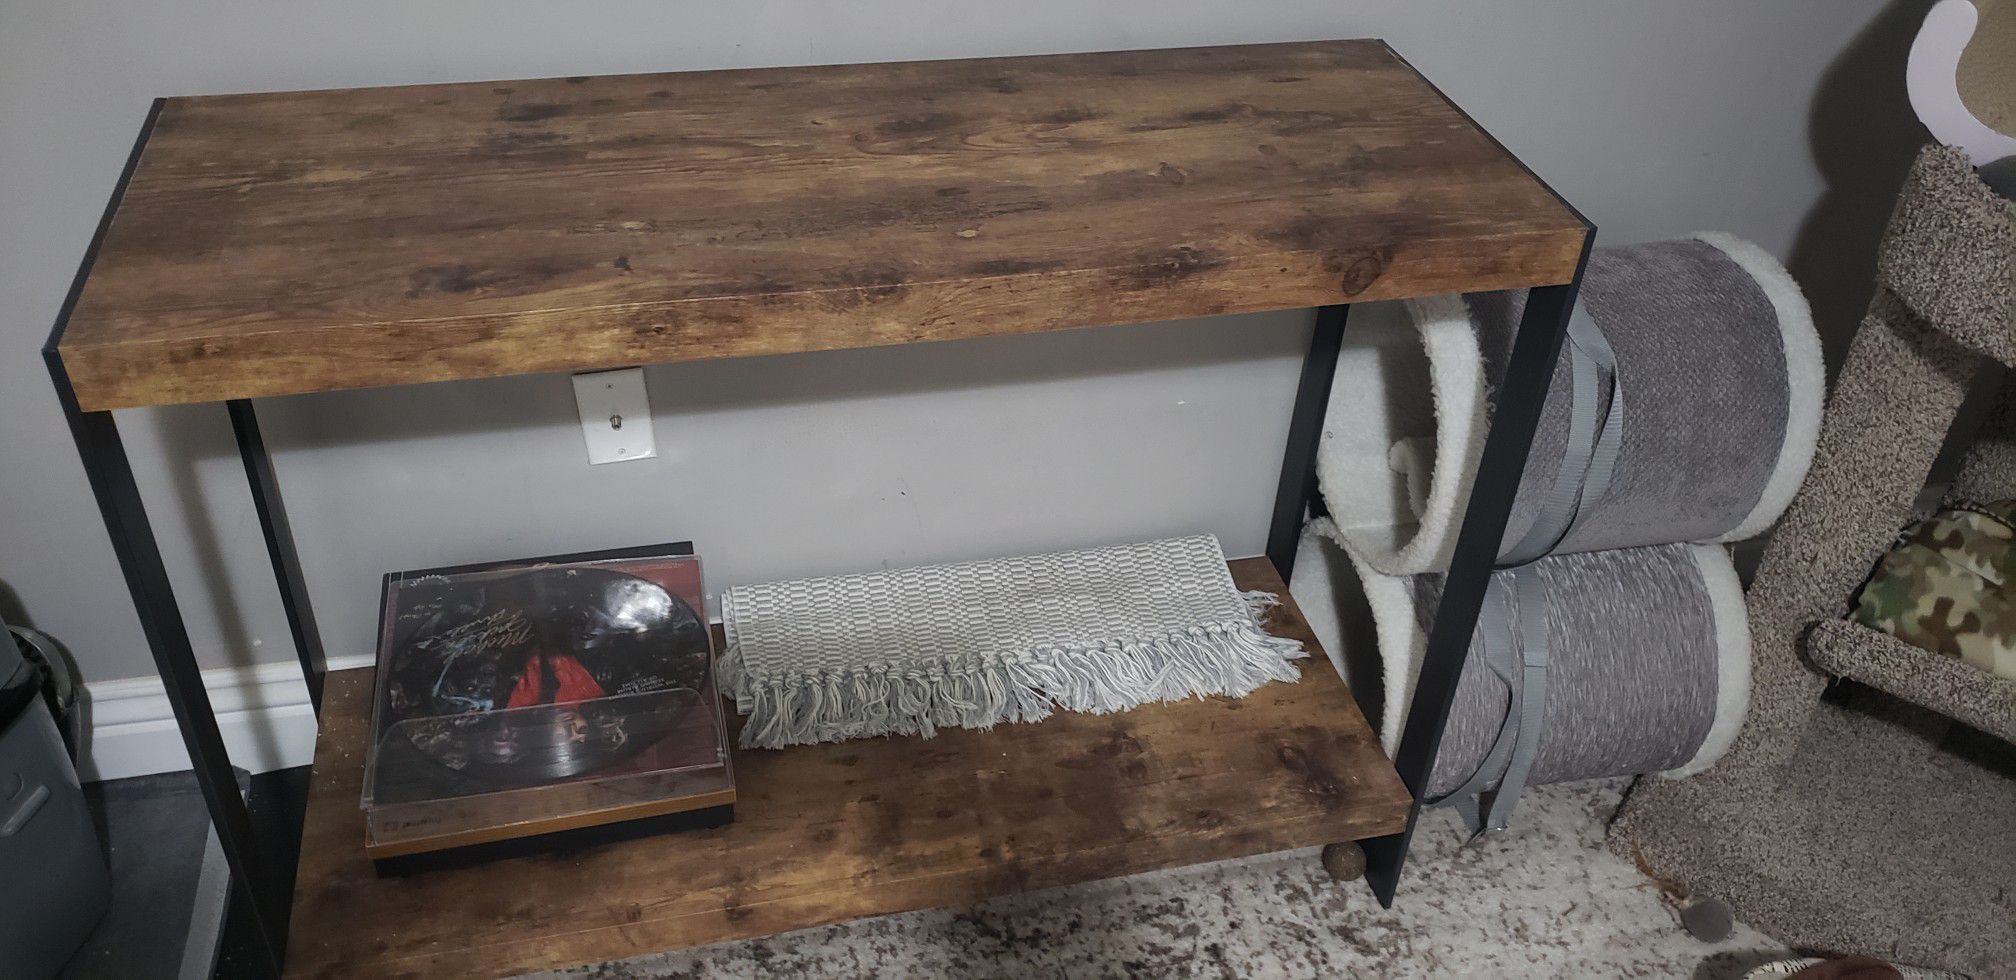 Metal and wood look side table, tv table, sofa table